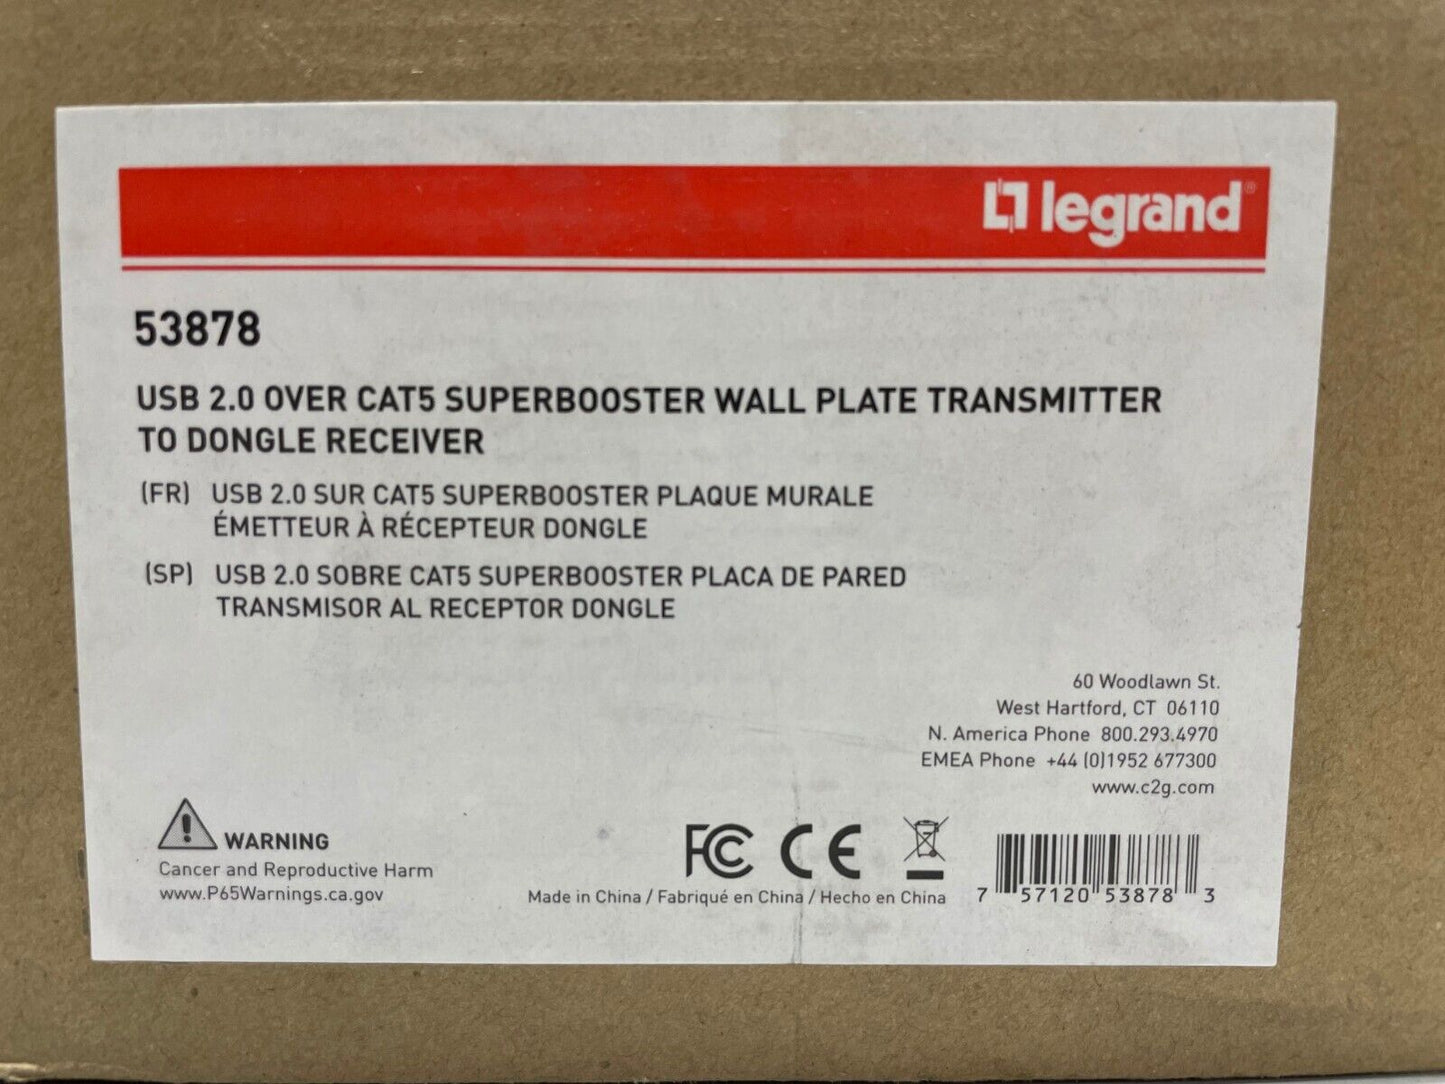 Legrand 53878 USB 2.0 over CAT5 Superbooster Wall Plate Transmitter + Receiver